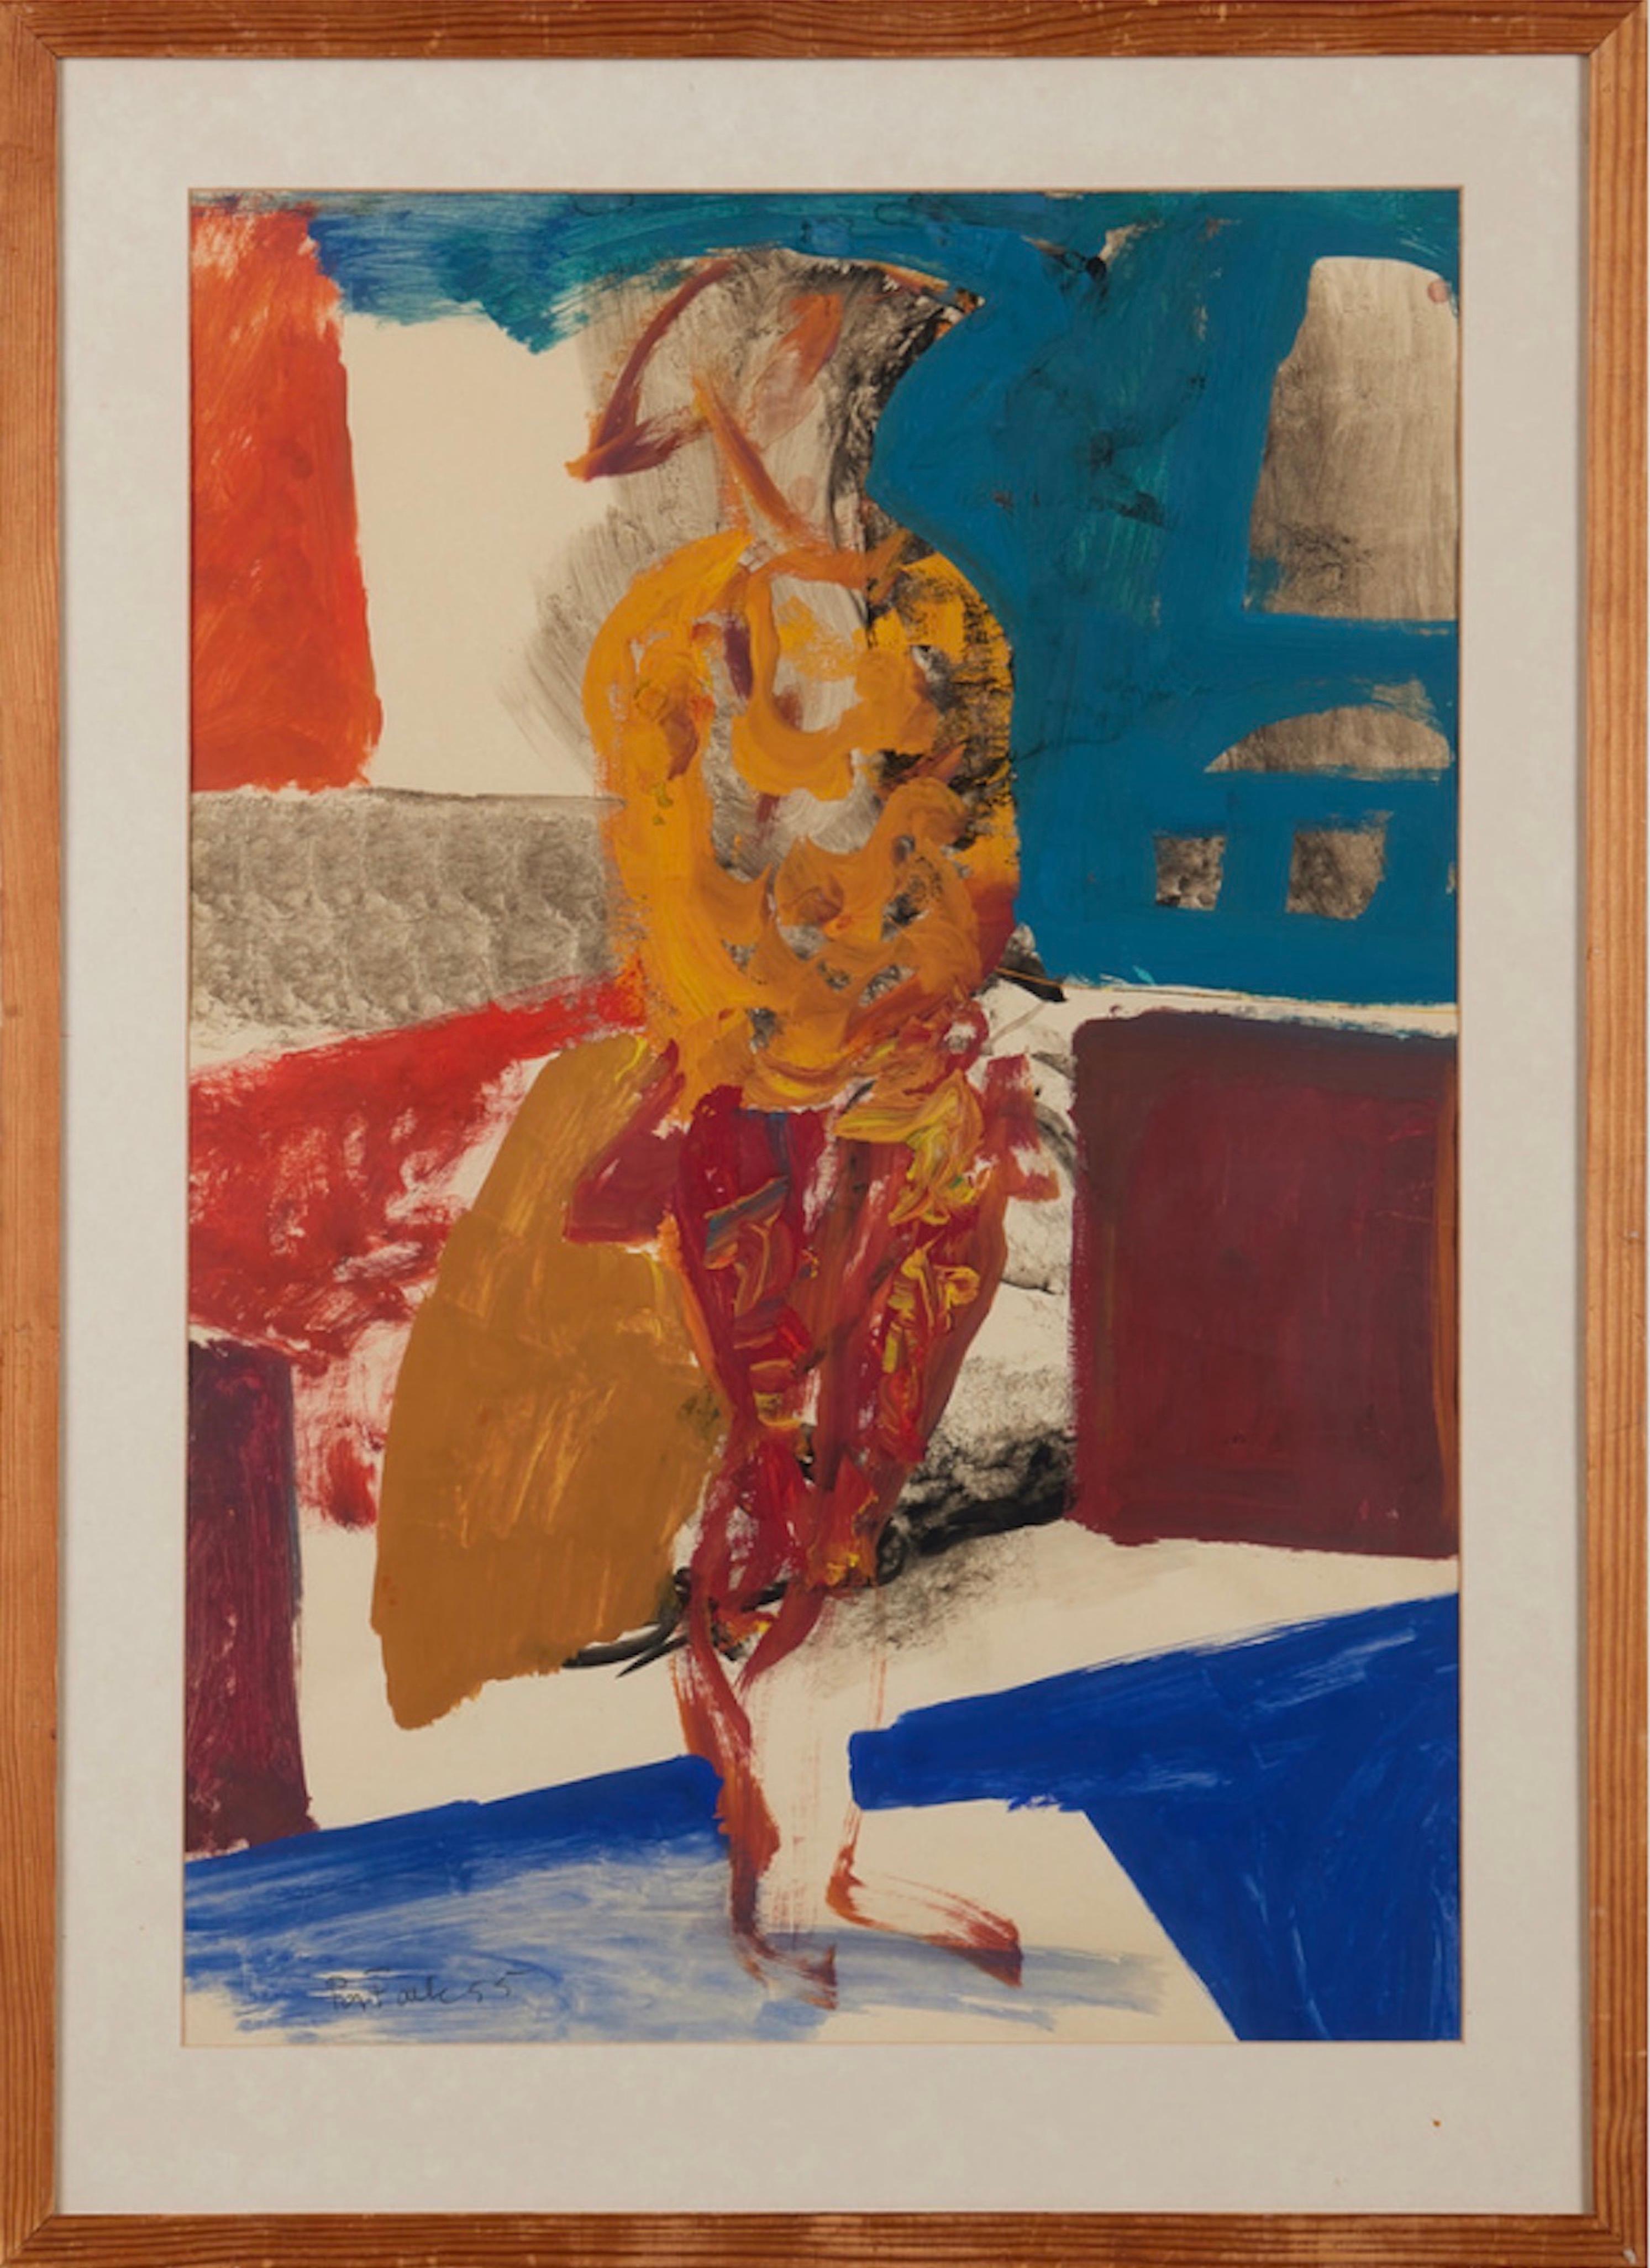 Unknown Figurative Painting - 1955 Vintage Framed Abstract Figurative Gouache Painting - The Matador